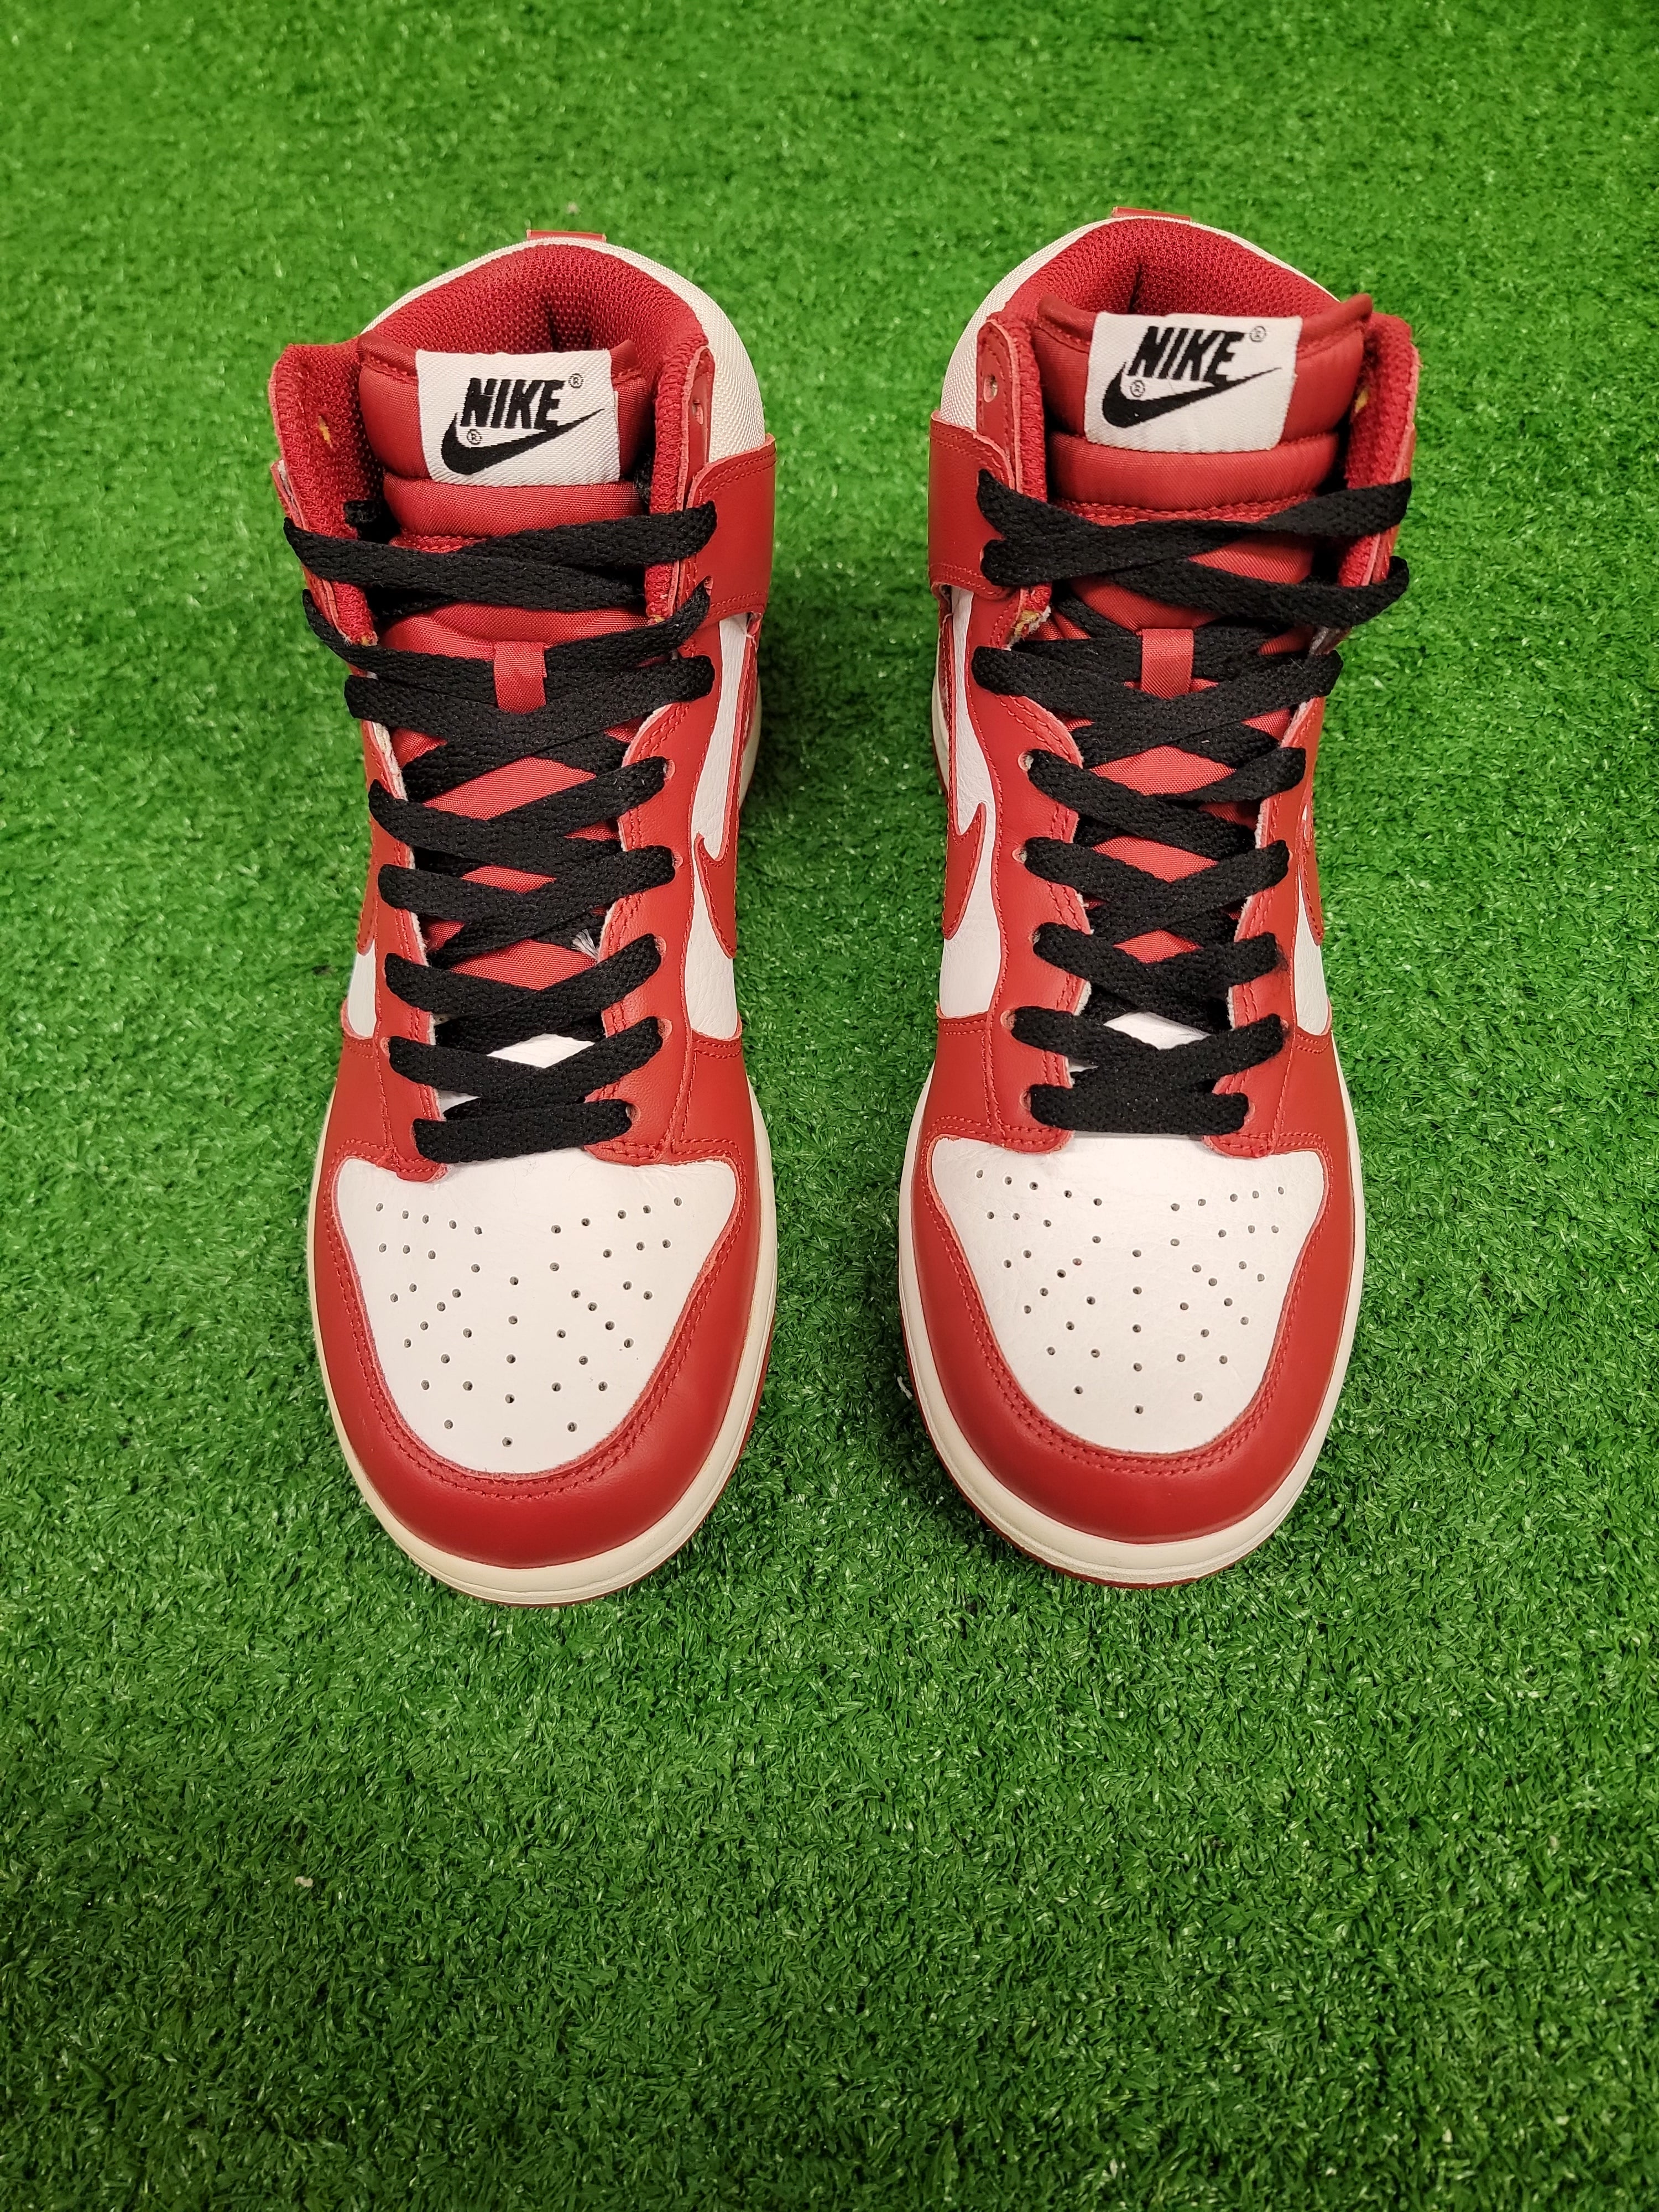 Pre Owned Nike Dunk High 2009 University Red size 8